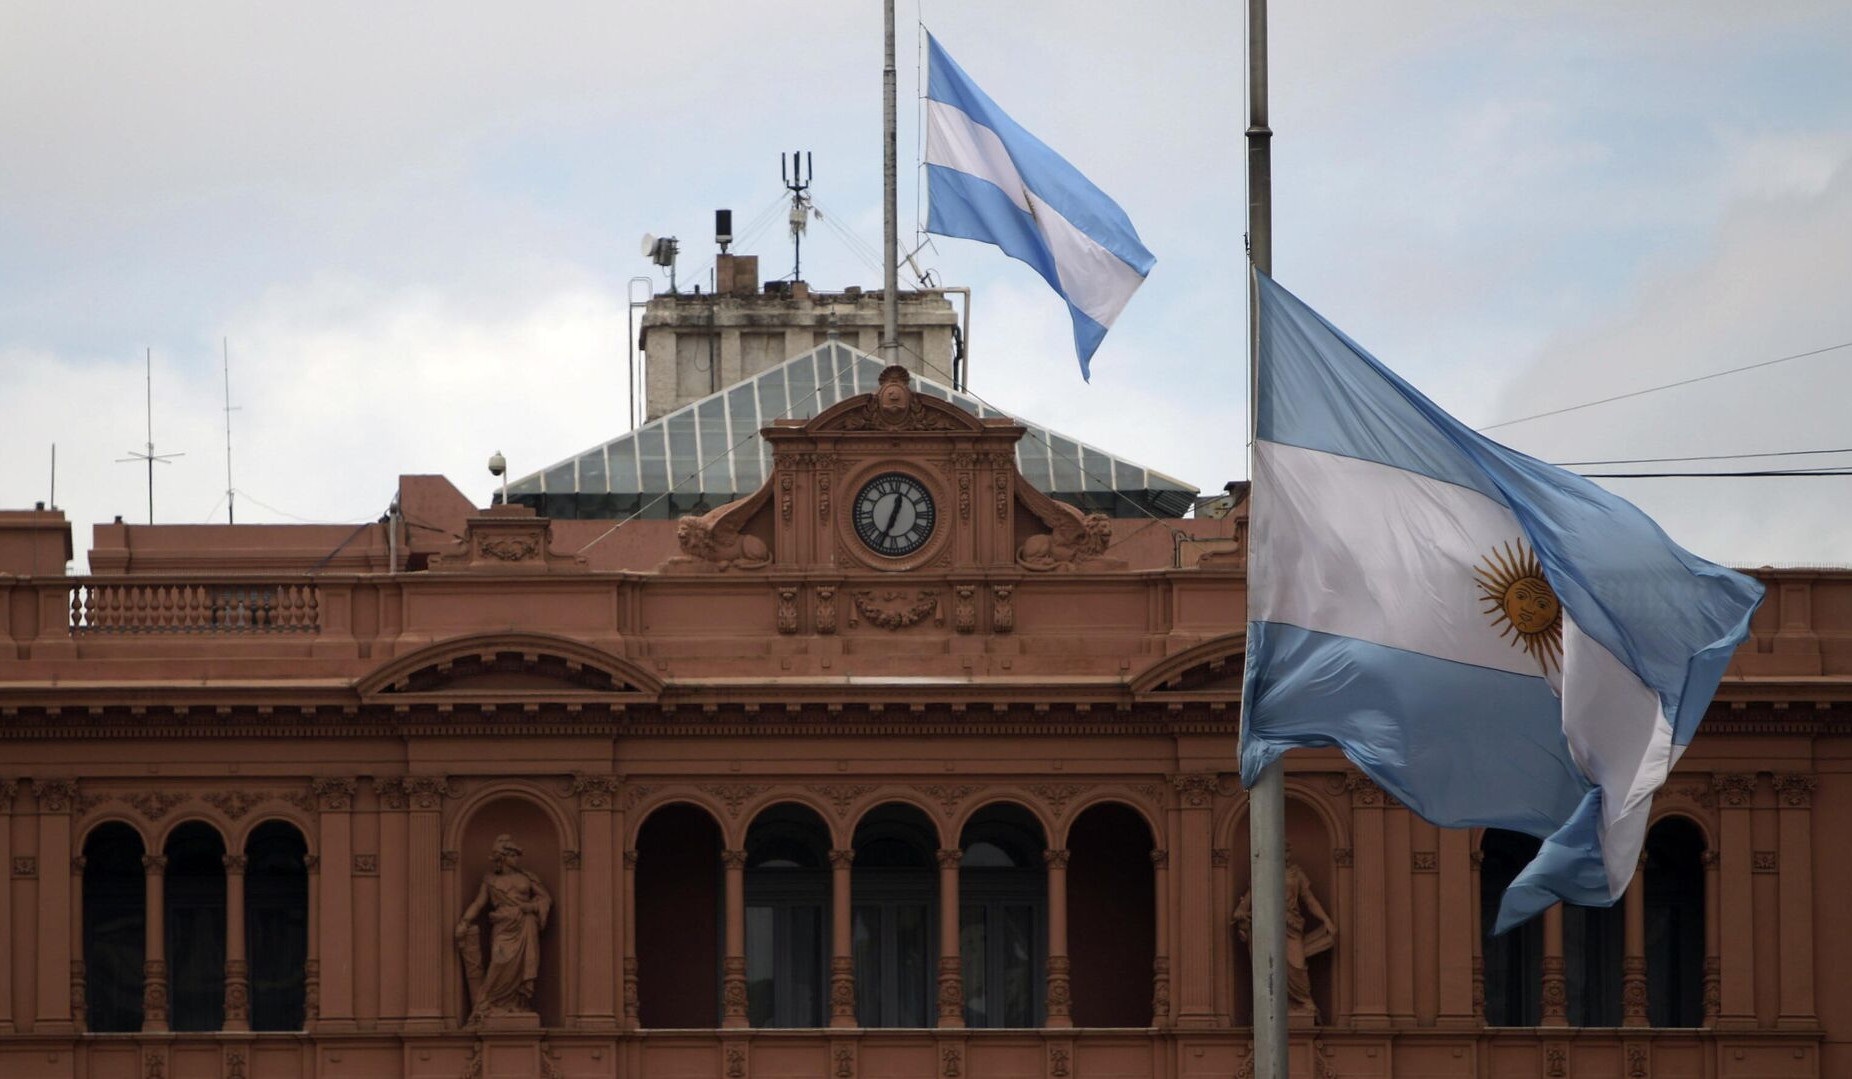 Argentina suggests UK to discuss Falkland issue again, reaffirms its sovereignty rights